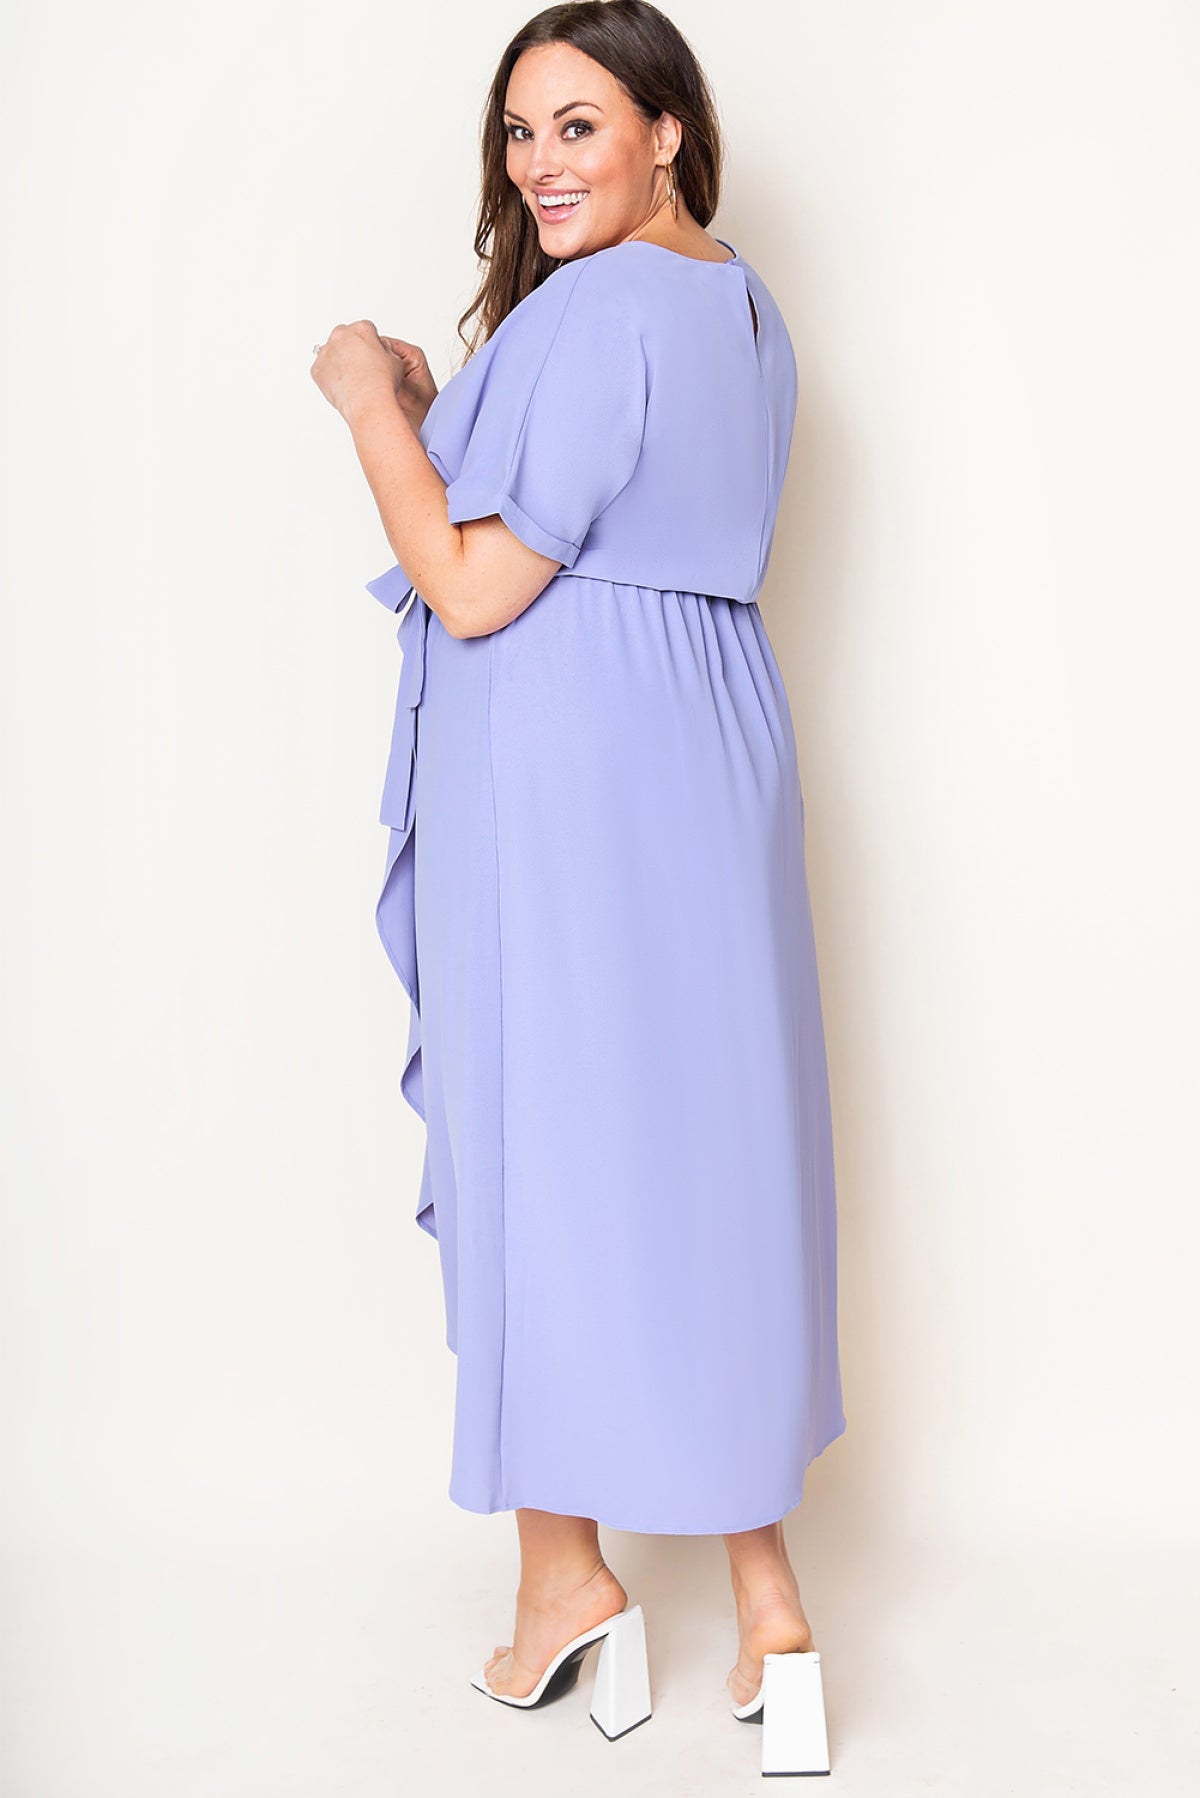 Plus Size Roll Up Short Sleeves High Low Maxi Dress